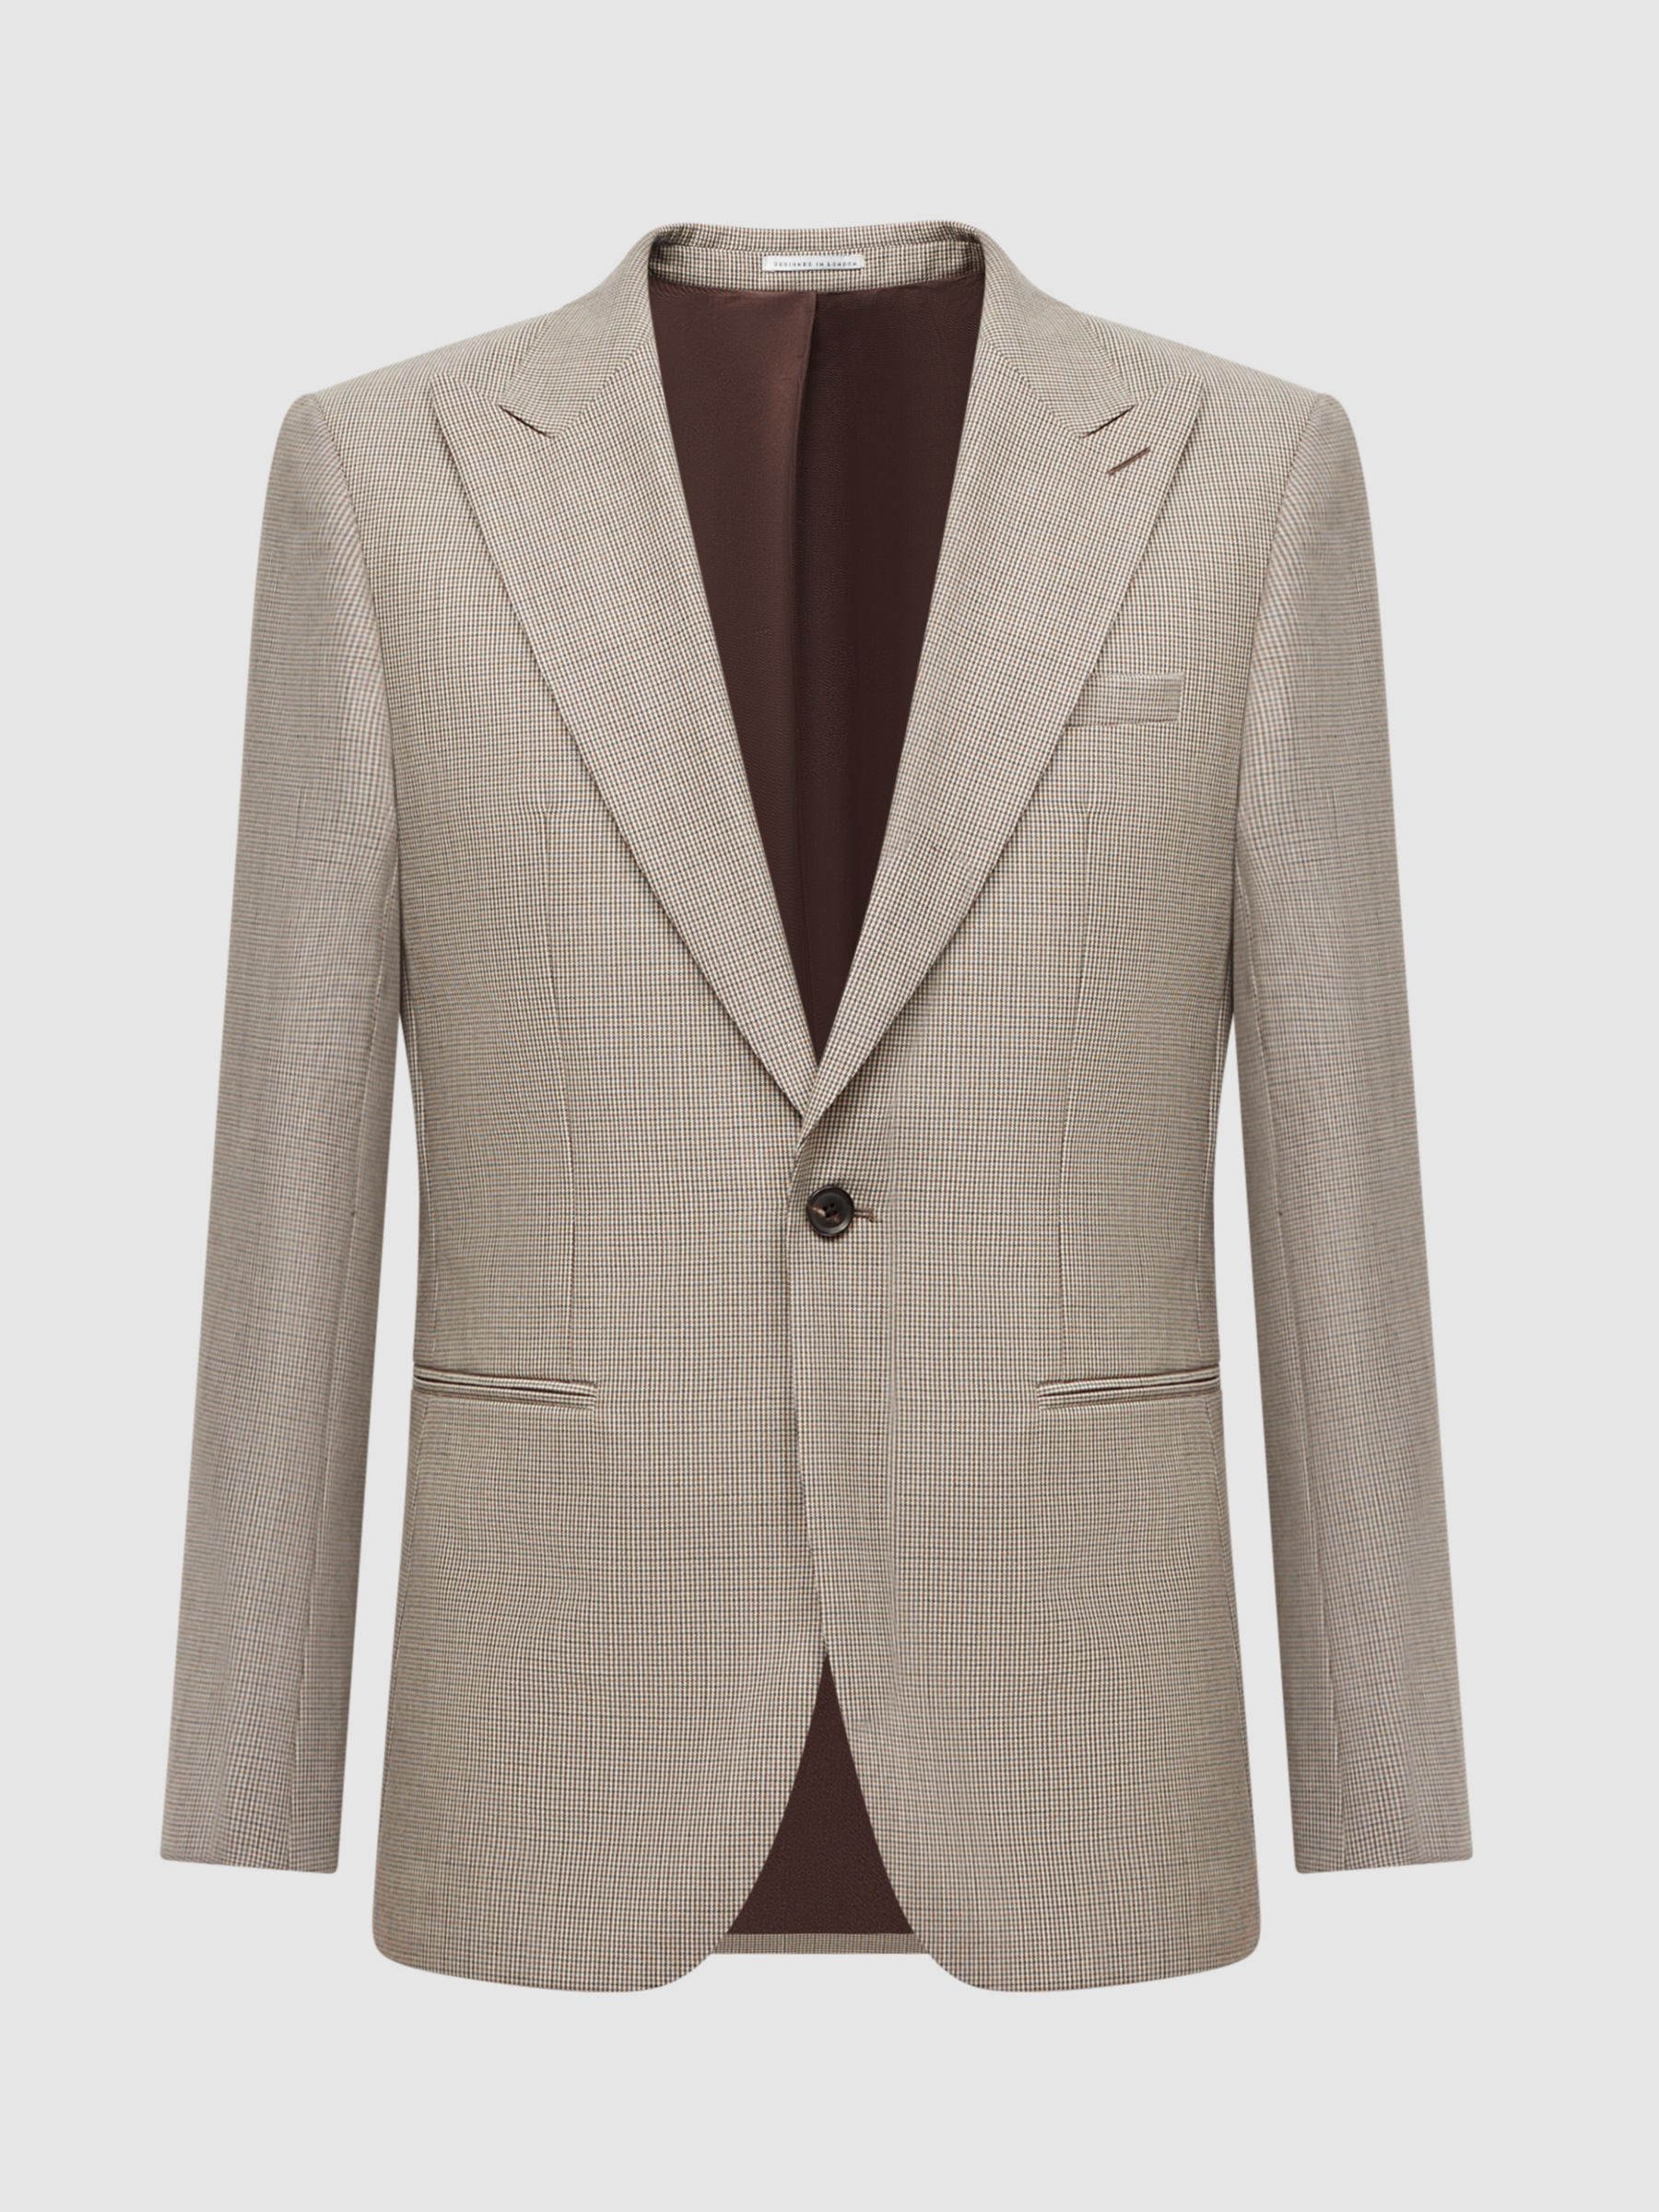 Reiss Pew Slim Fit Wool Single Breasted Puppytooth Blazer, Brown at ...